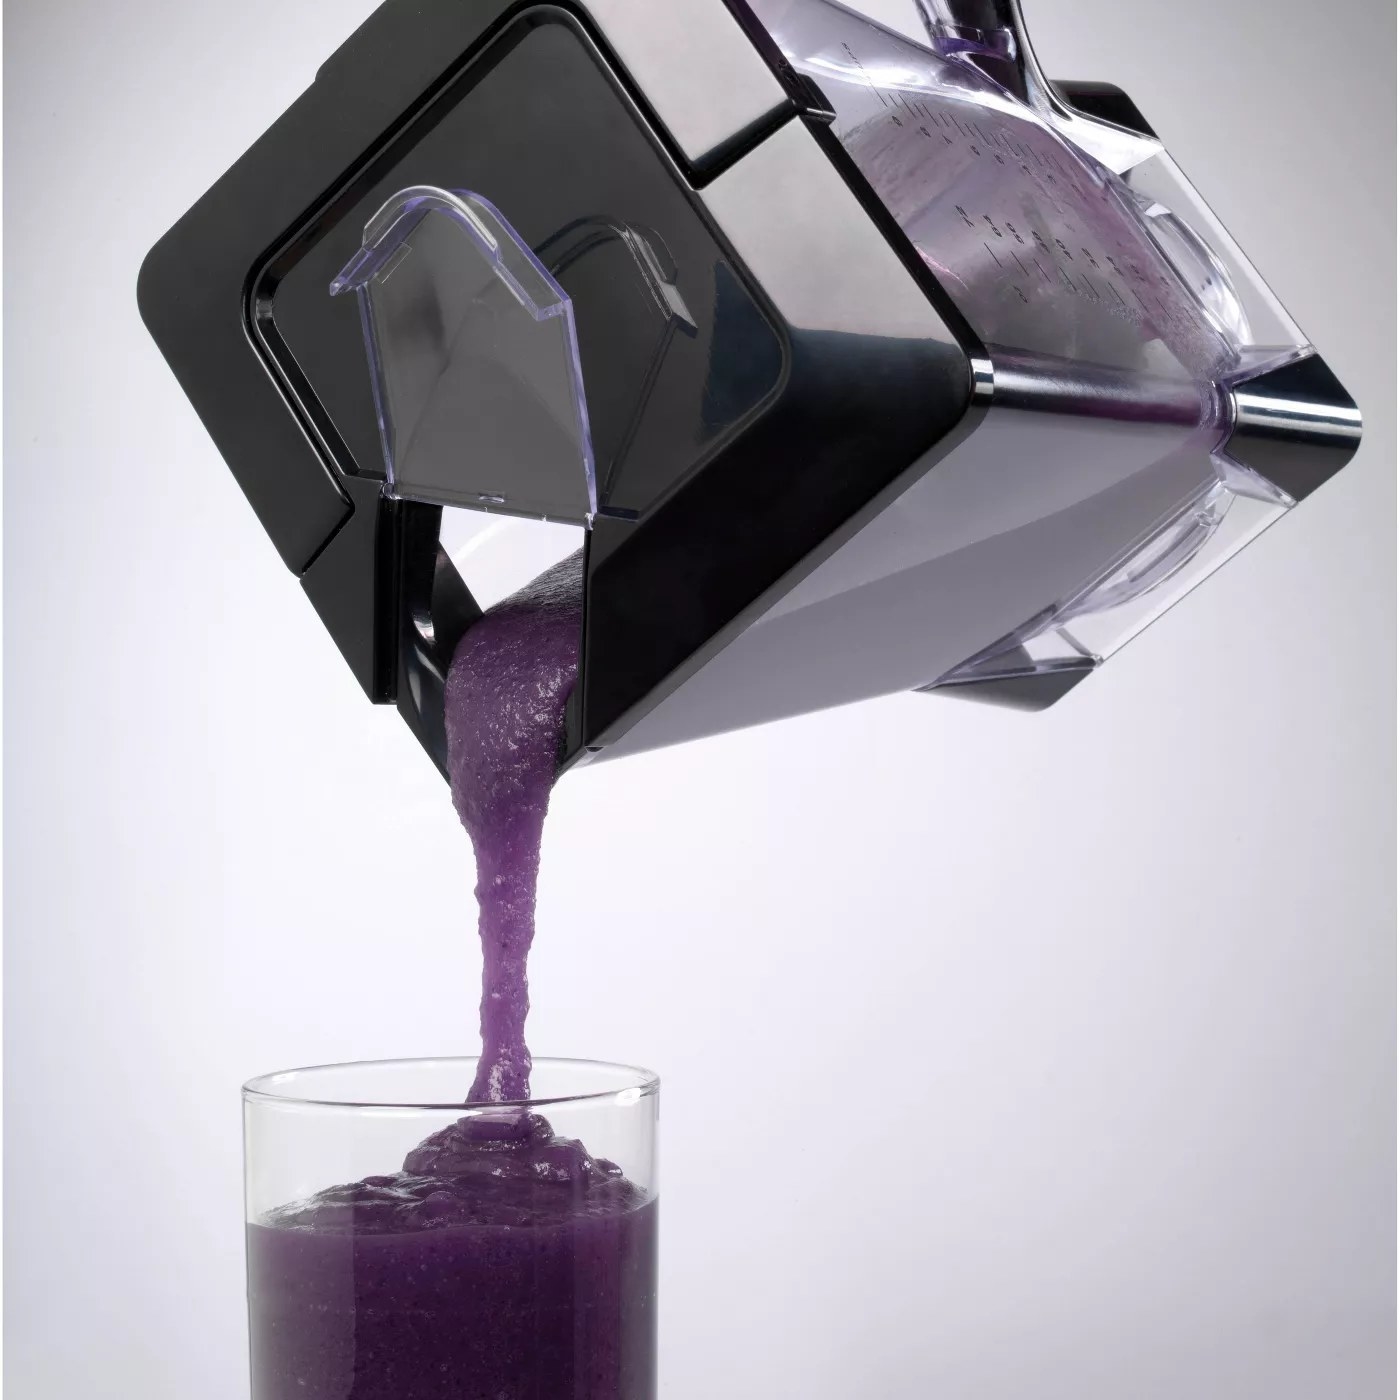 A smoothie being poured out of the top of the blender